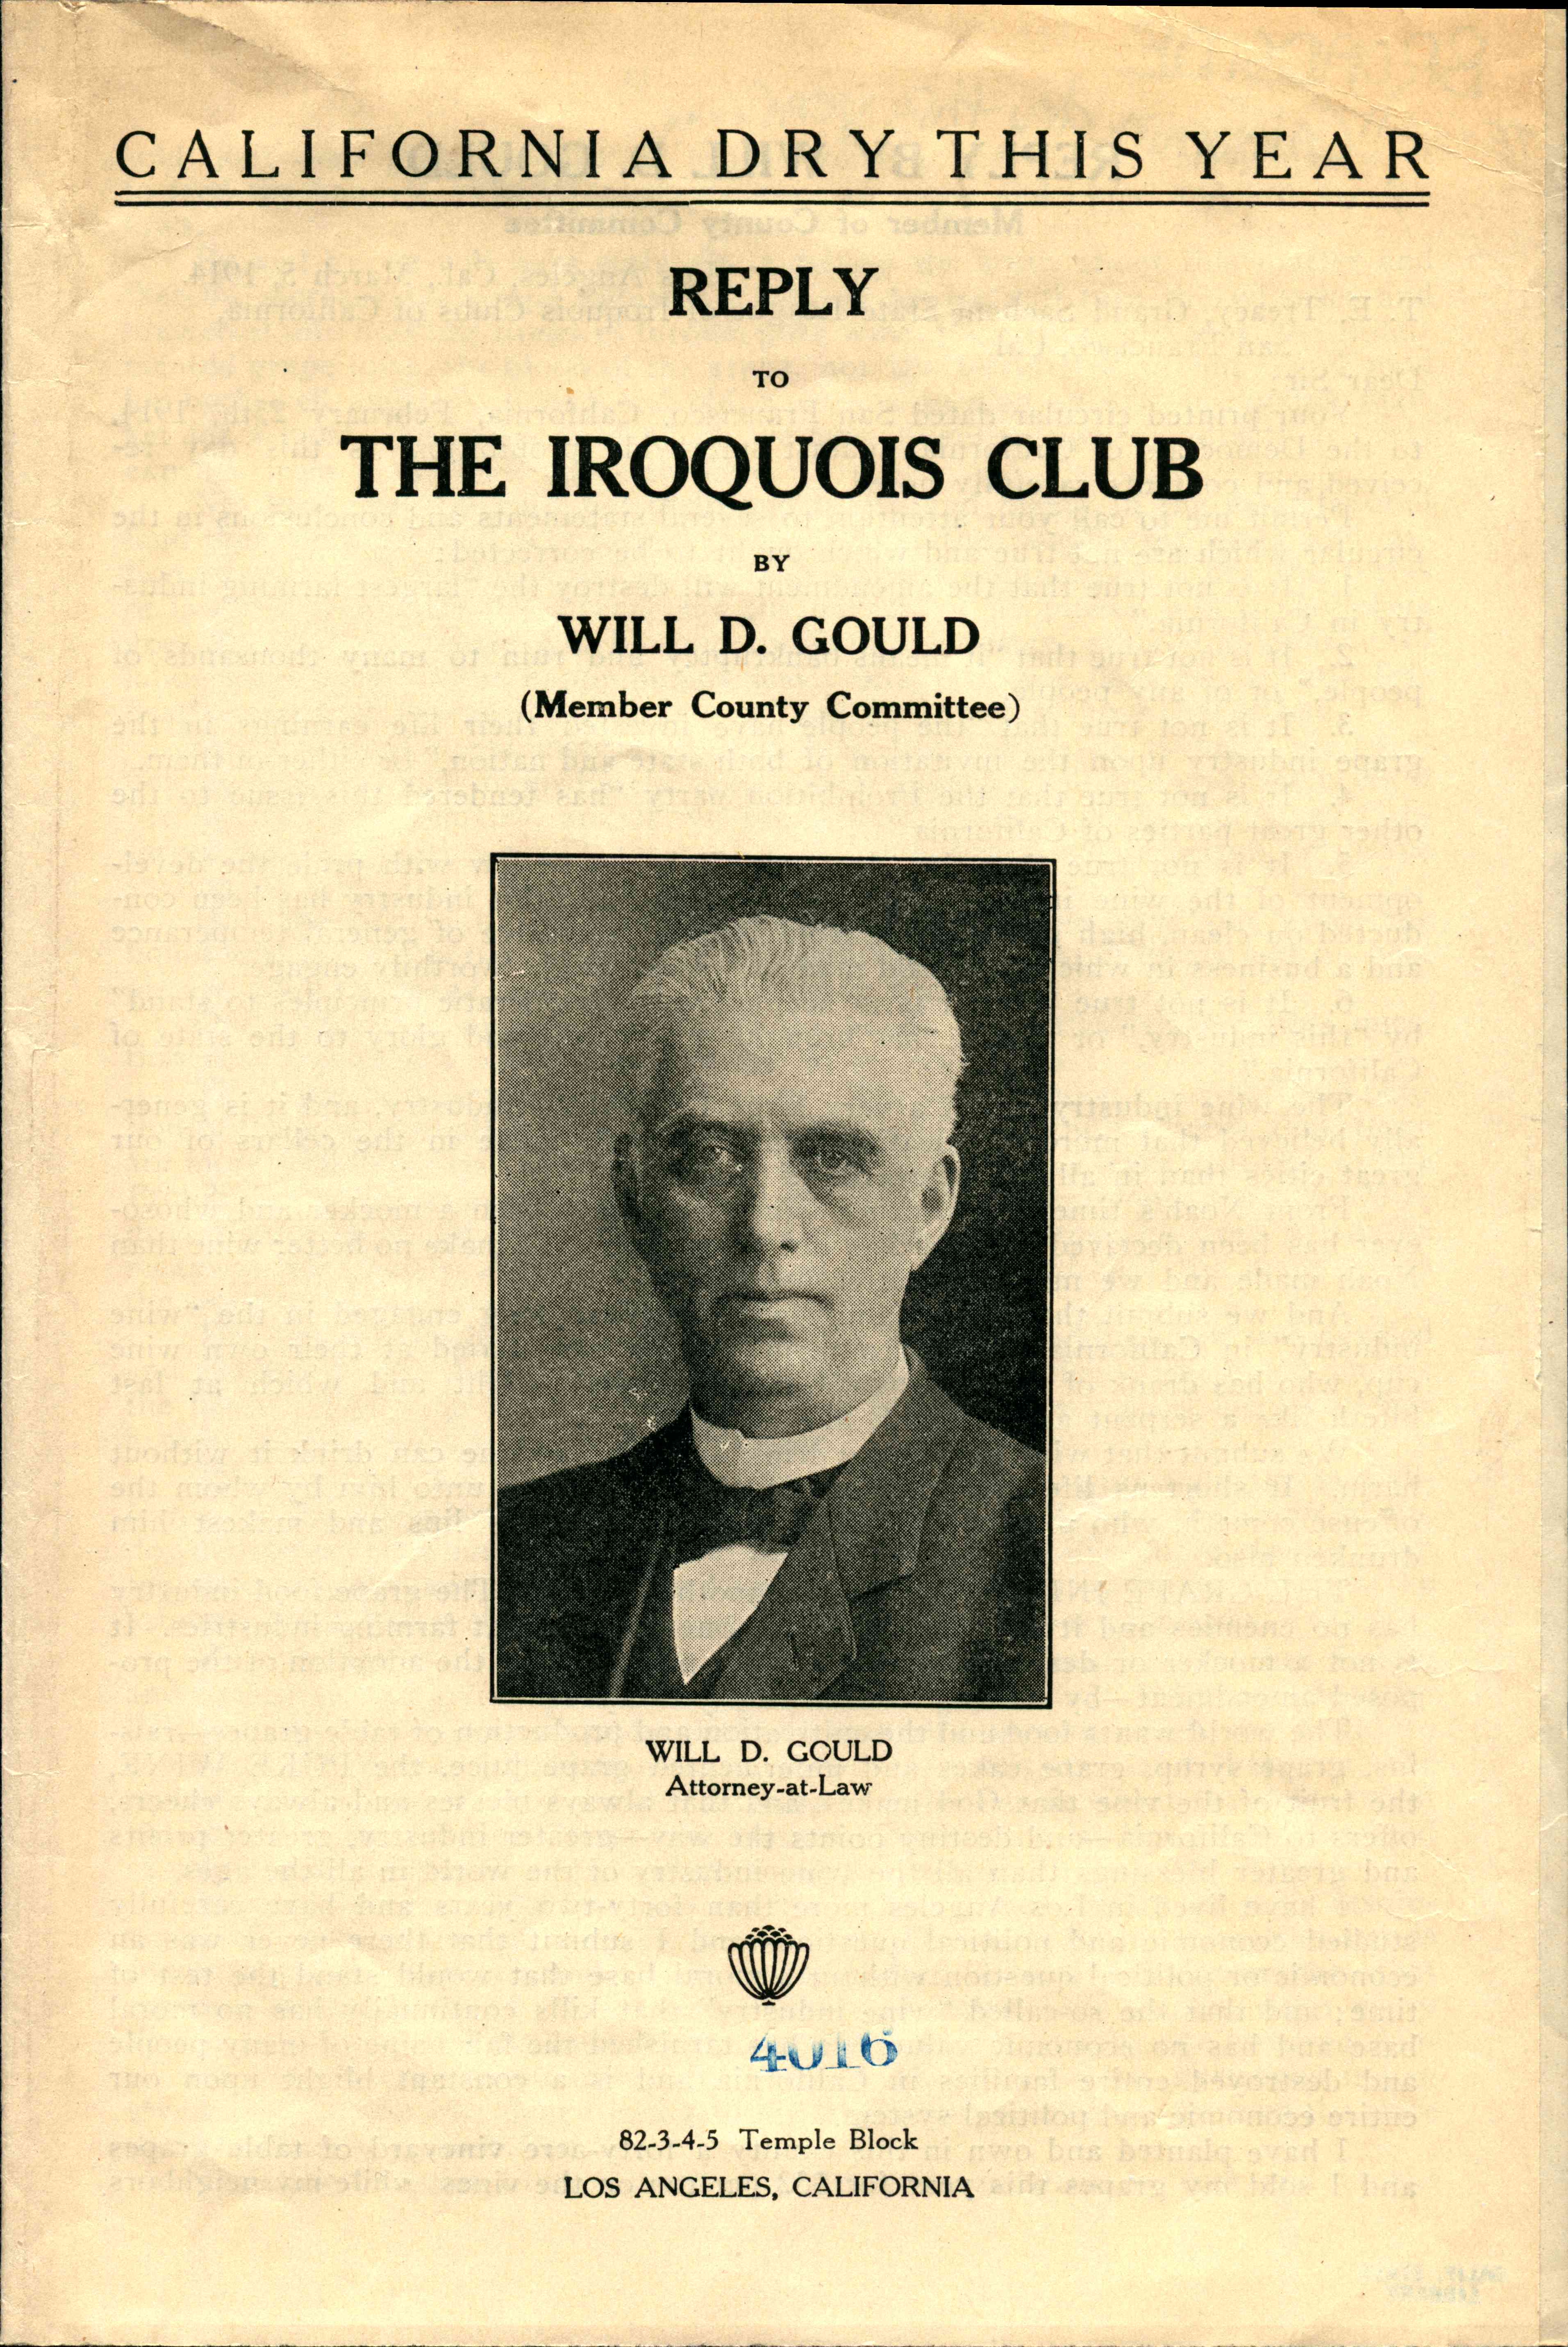 A picture of Will D. Gould in the middle of the page